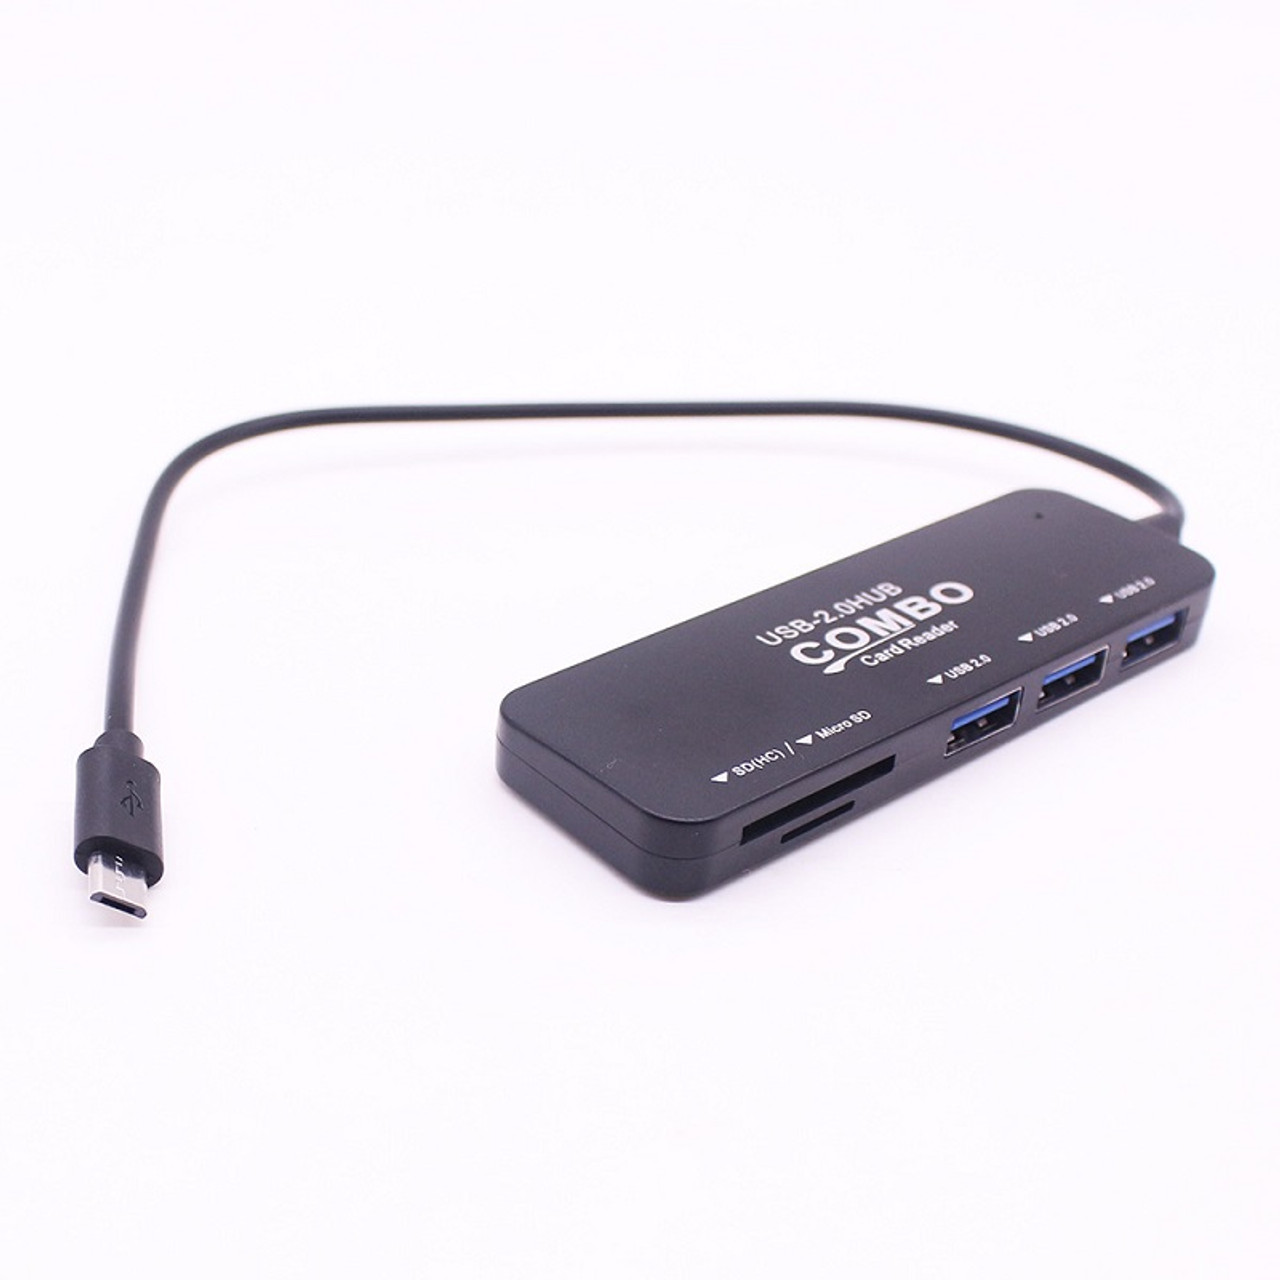 Micro USB Card Reader Plus USB HUB 2in1 Combo Adapter Supports SD SDHC SDXC TF Memory Cards